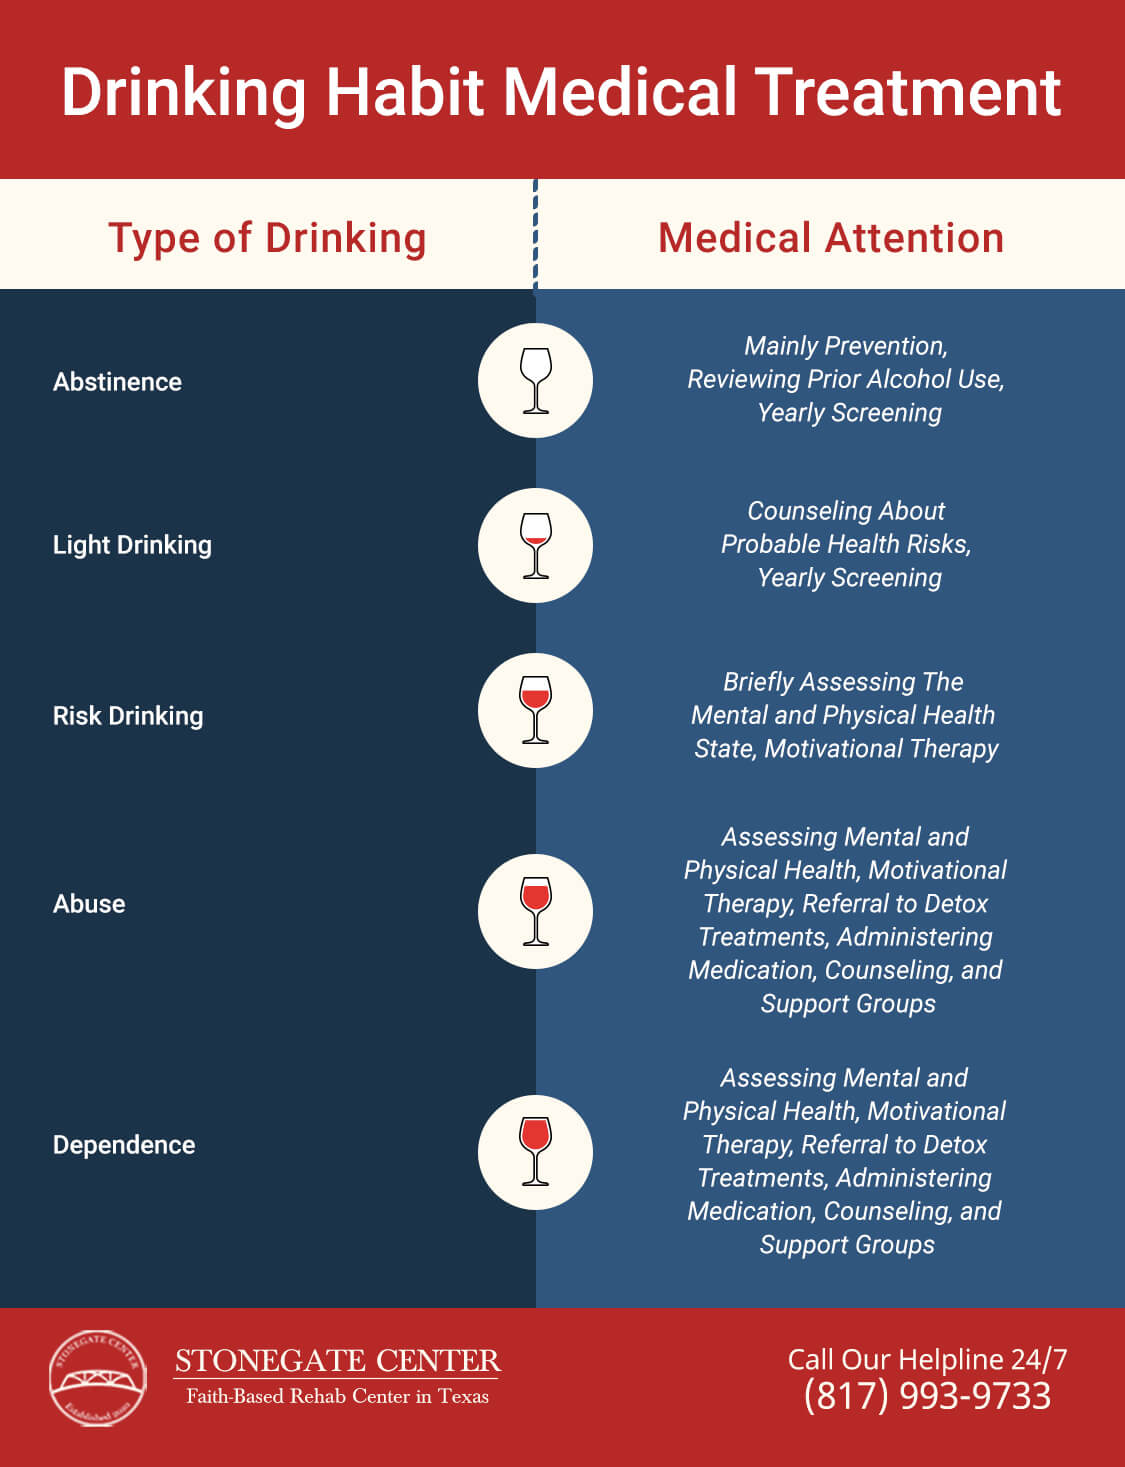 Stonegate Center Blog - Is Alcoholism Considered a Disability? - Drinking Habit Medical Treatment